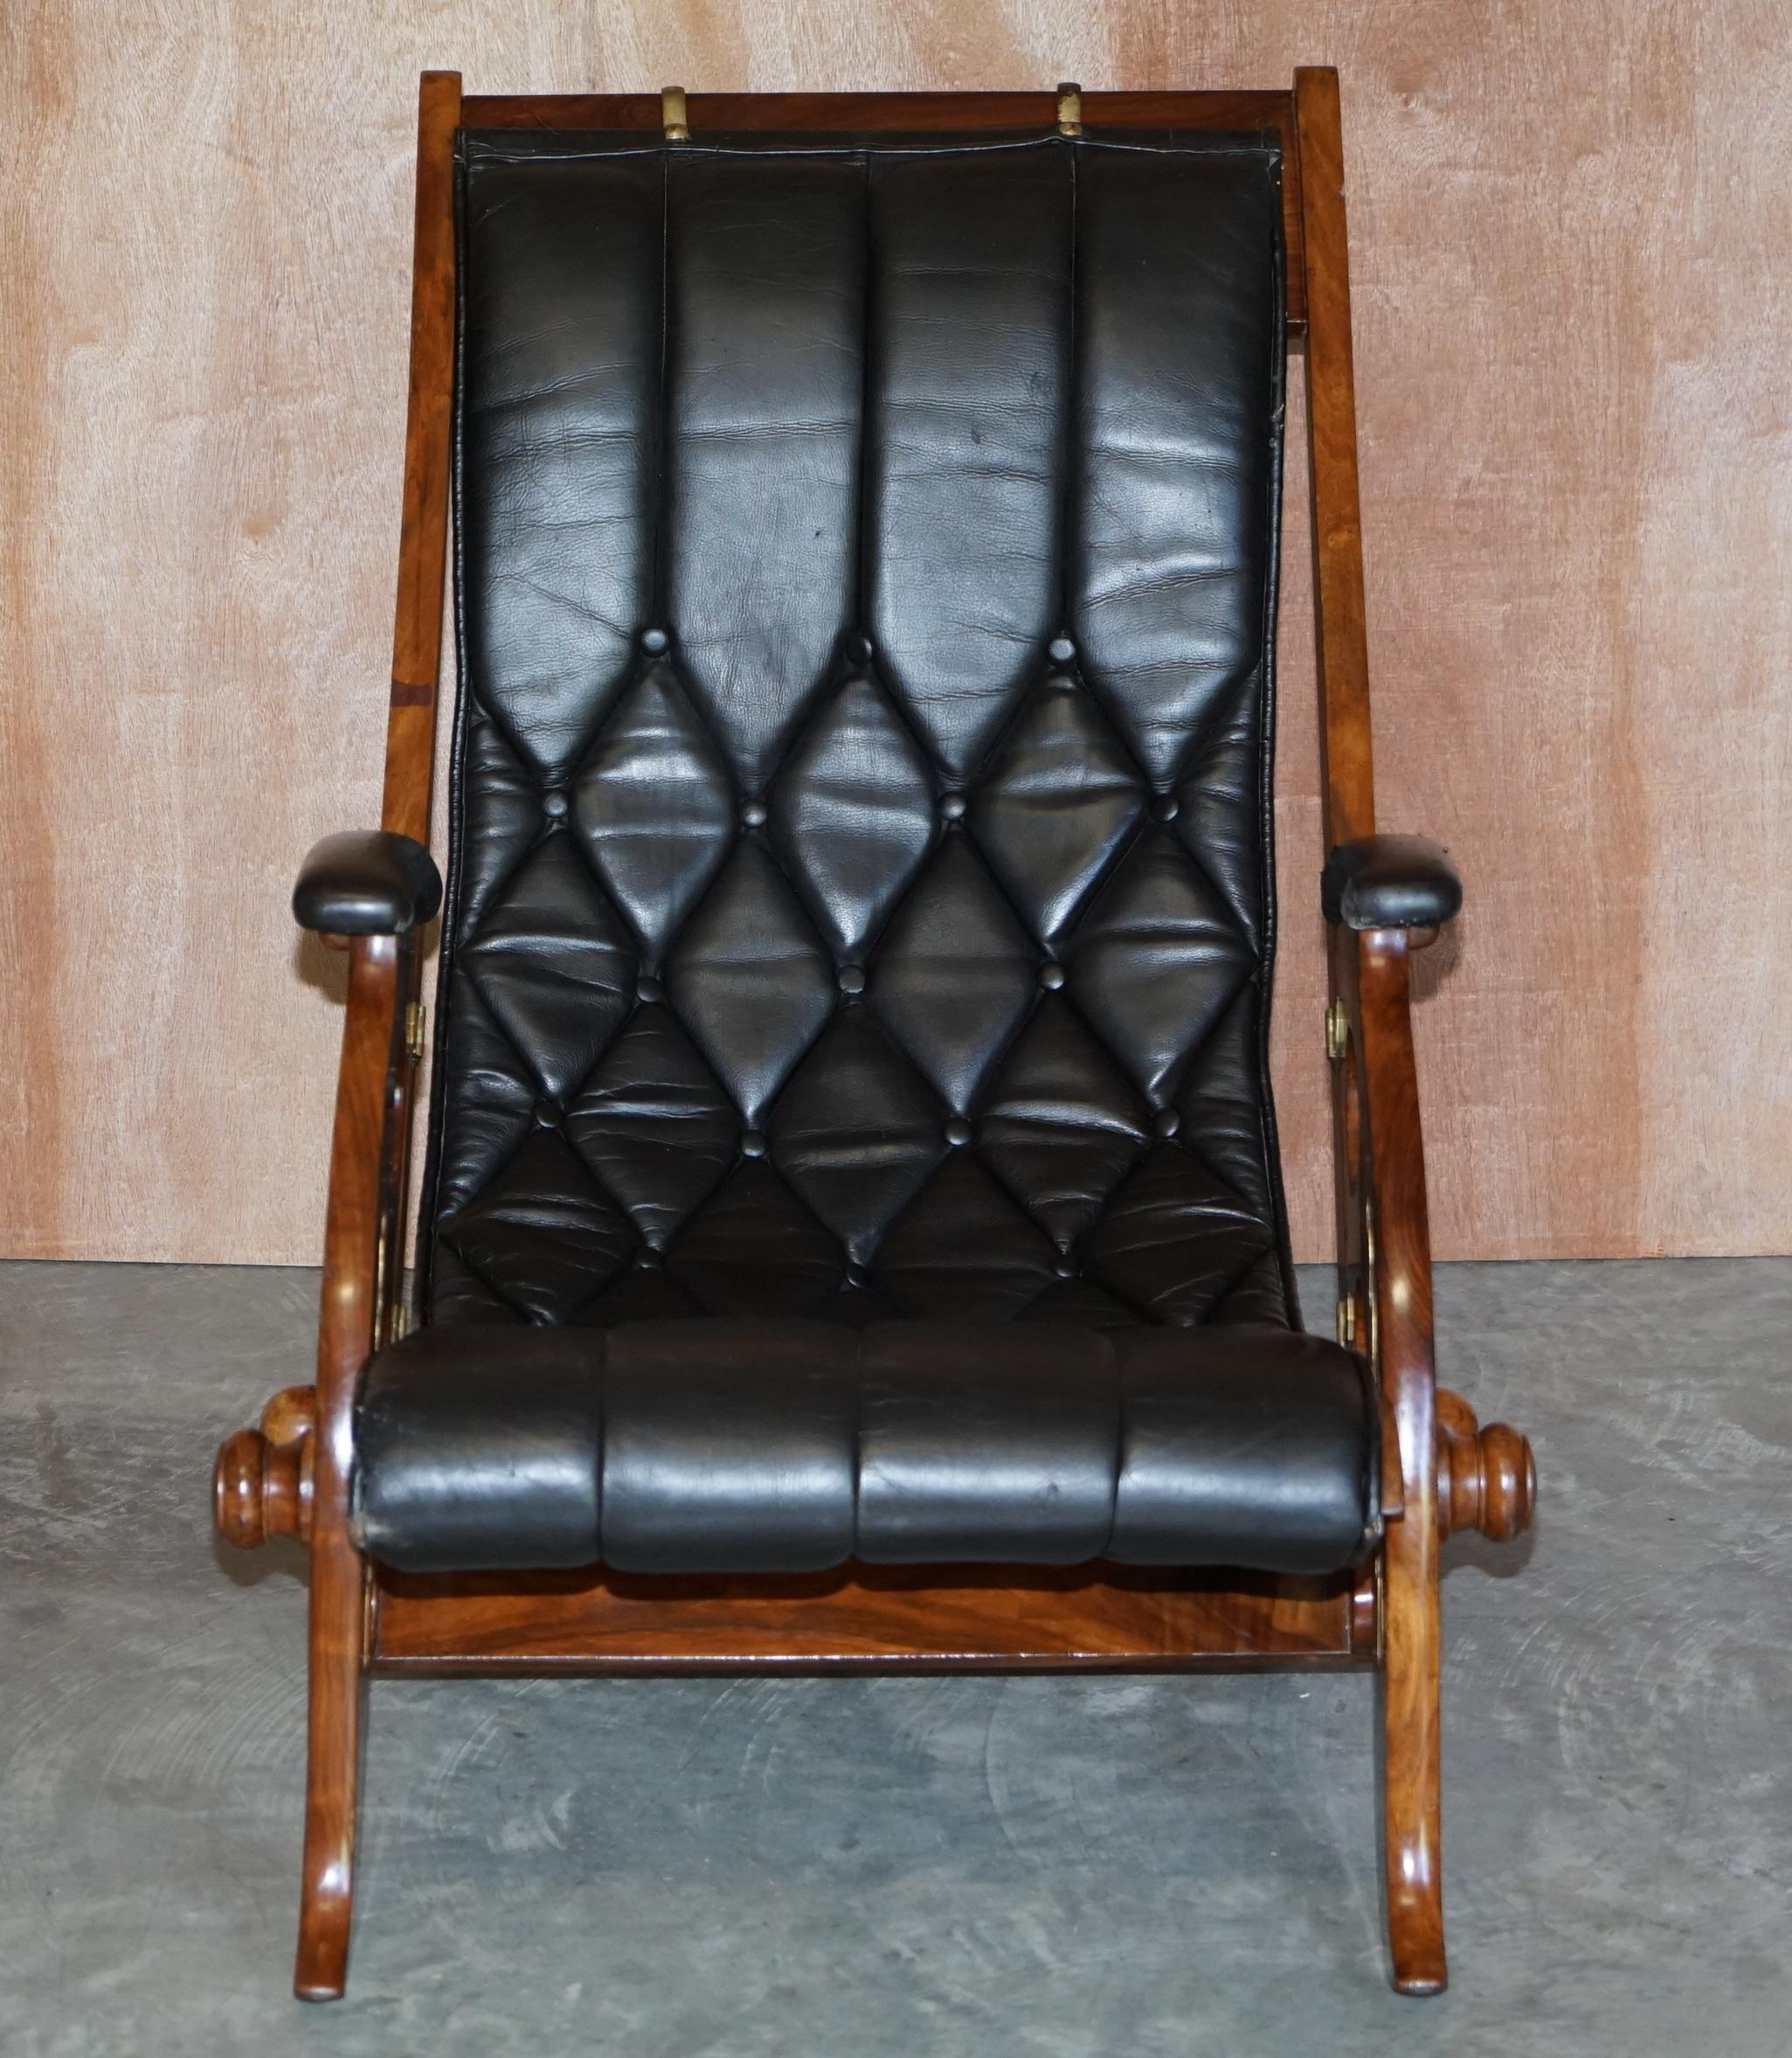 We are delighted to offer for sale absolutely stunning original 19th century Anglo Indian Campaign Military folding armchair is solid Elm with the original Rexene seat pad by J Herbert McNair

This chair was designed for style and comfort. The